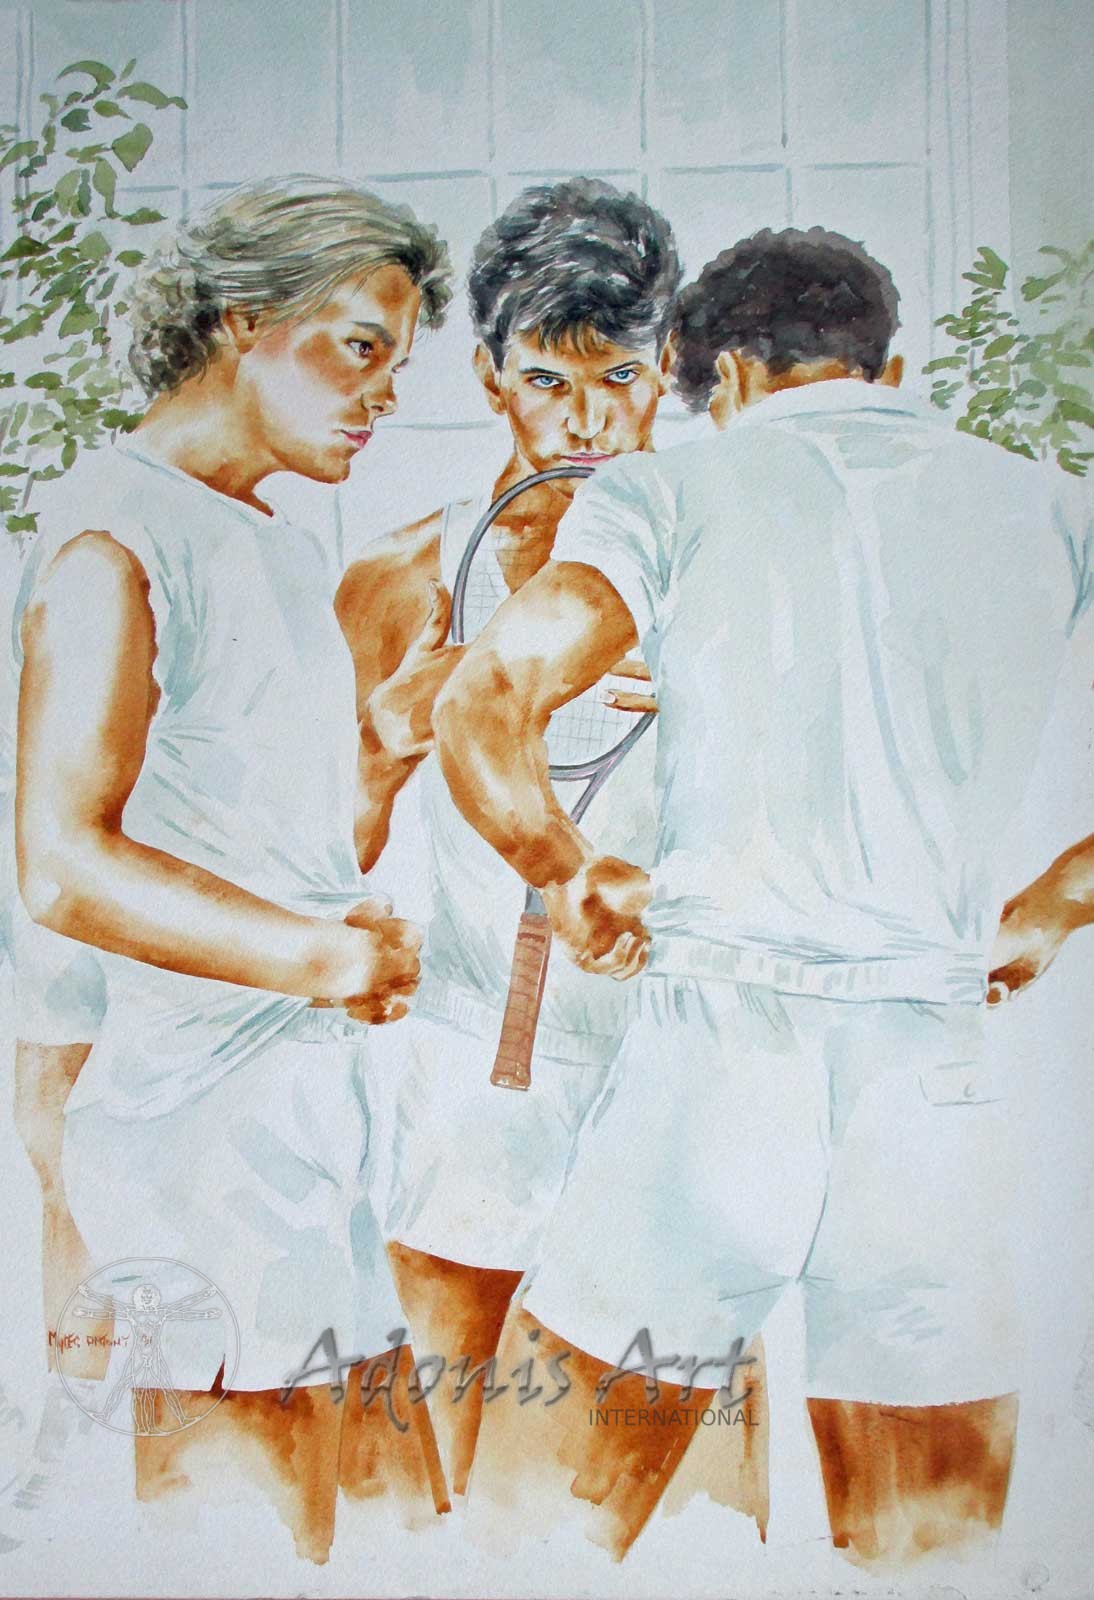 'Disecting the Game' watercolour by Myles Antony